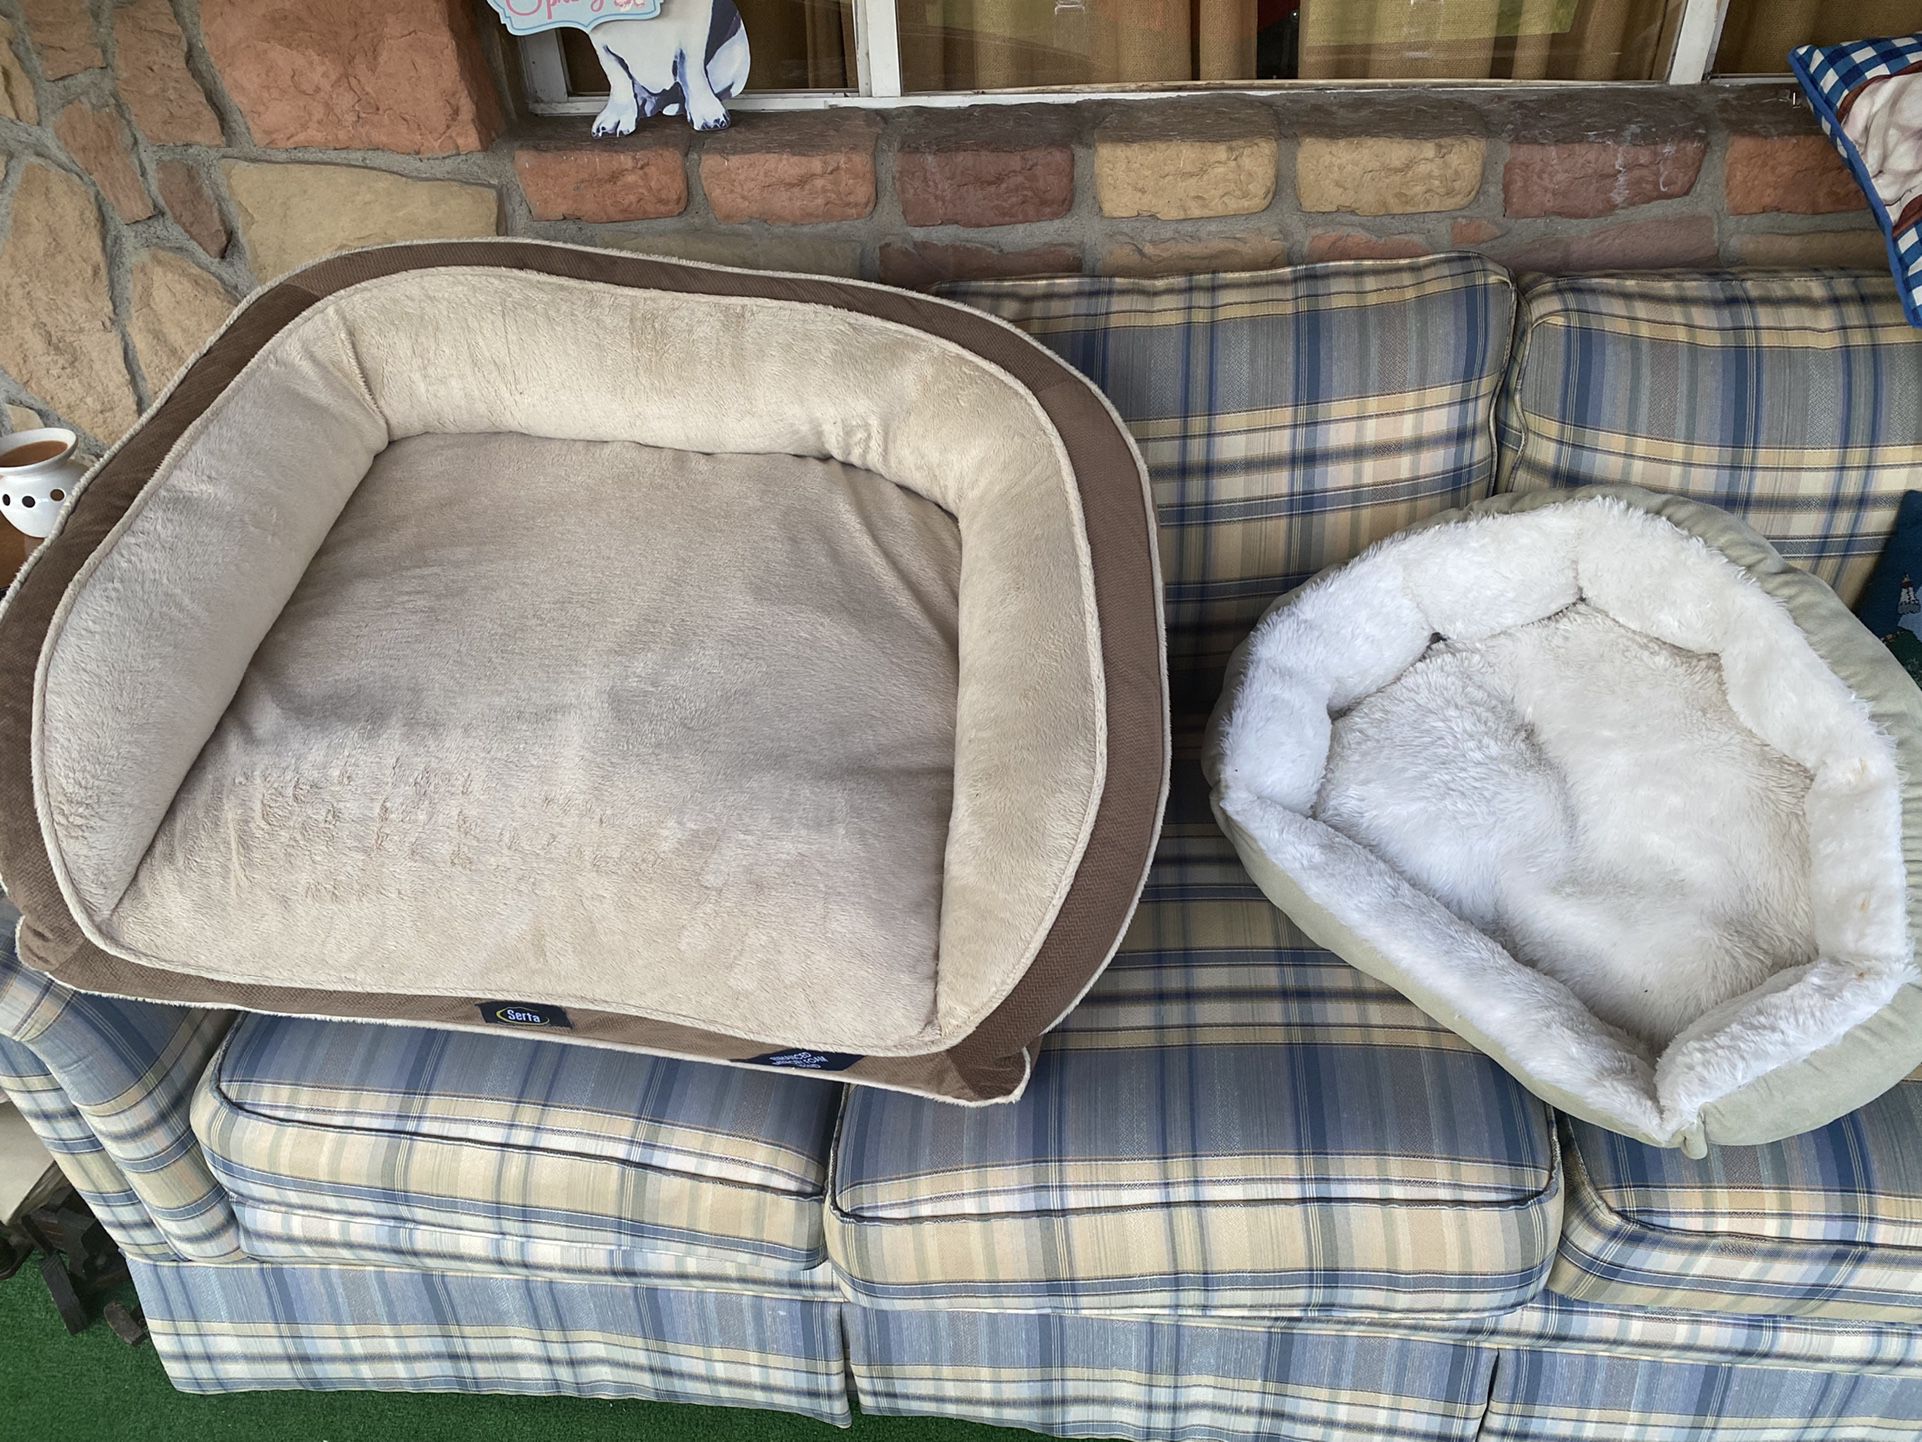 Large Dog Bed And Smaller Dog Bed